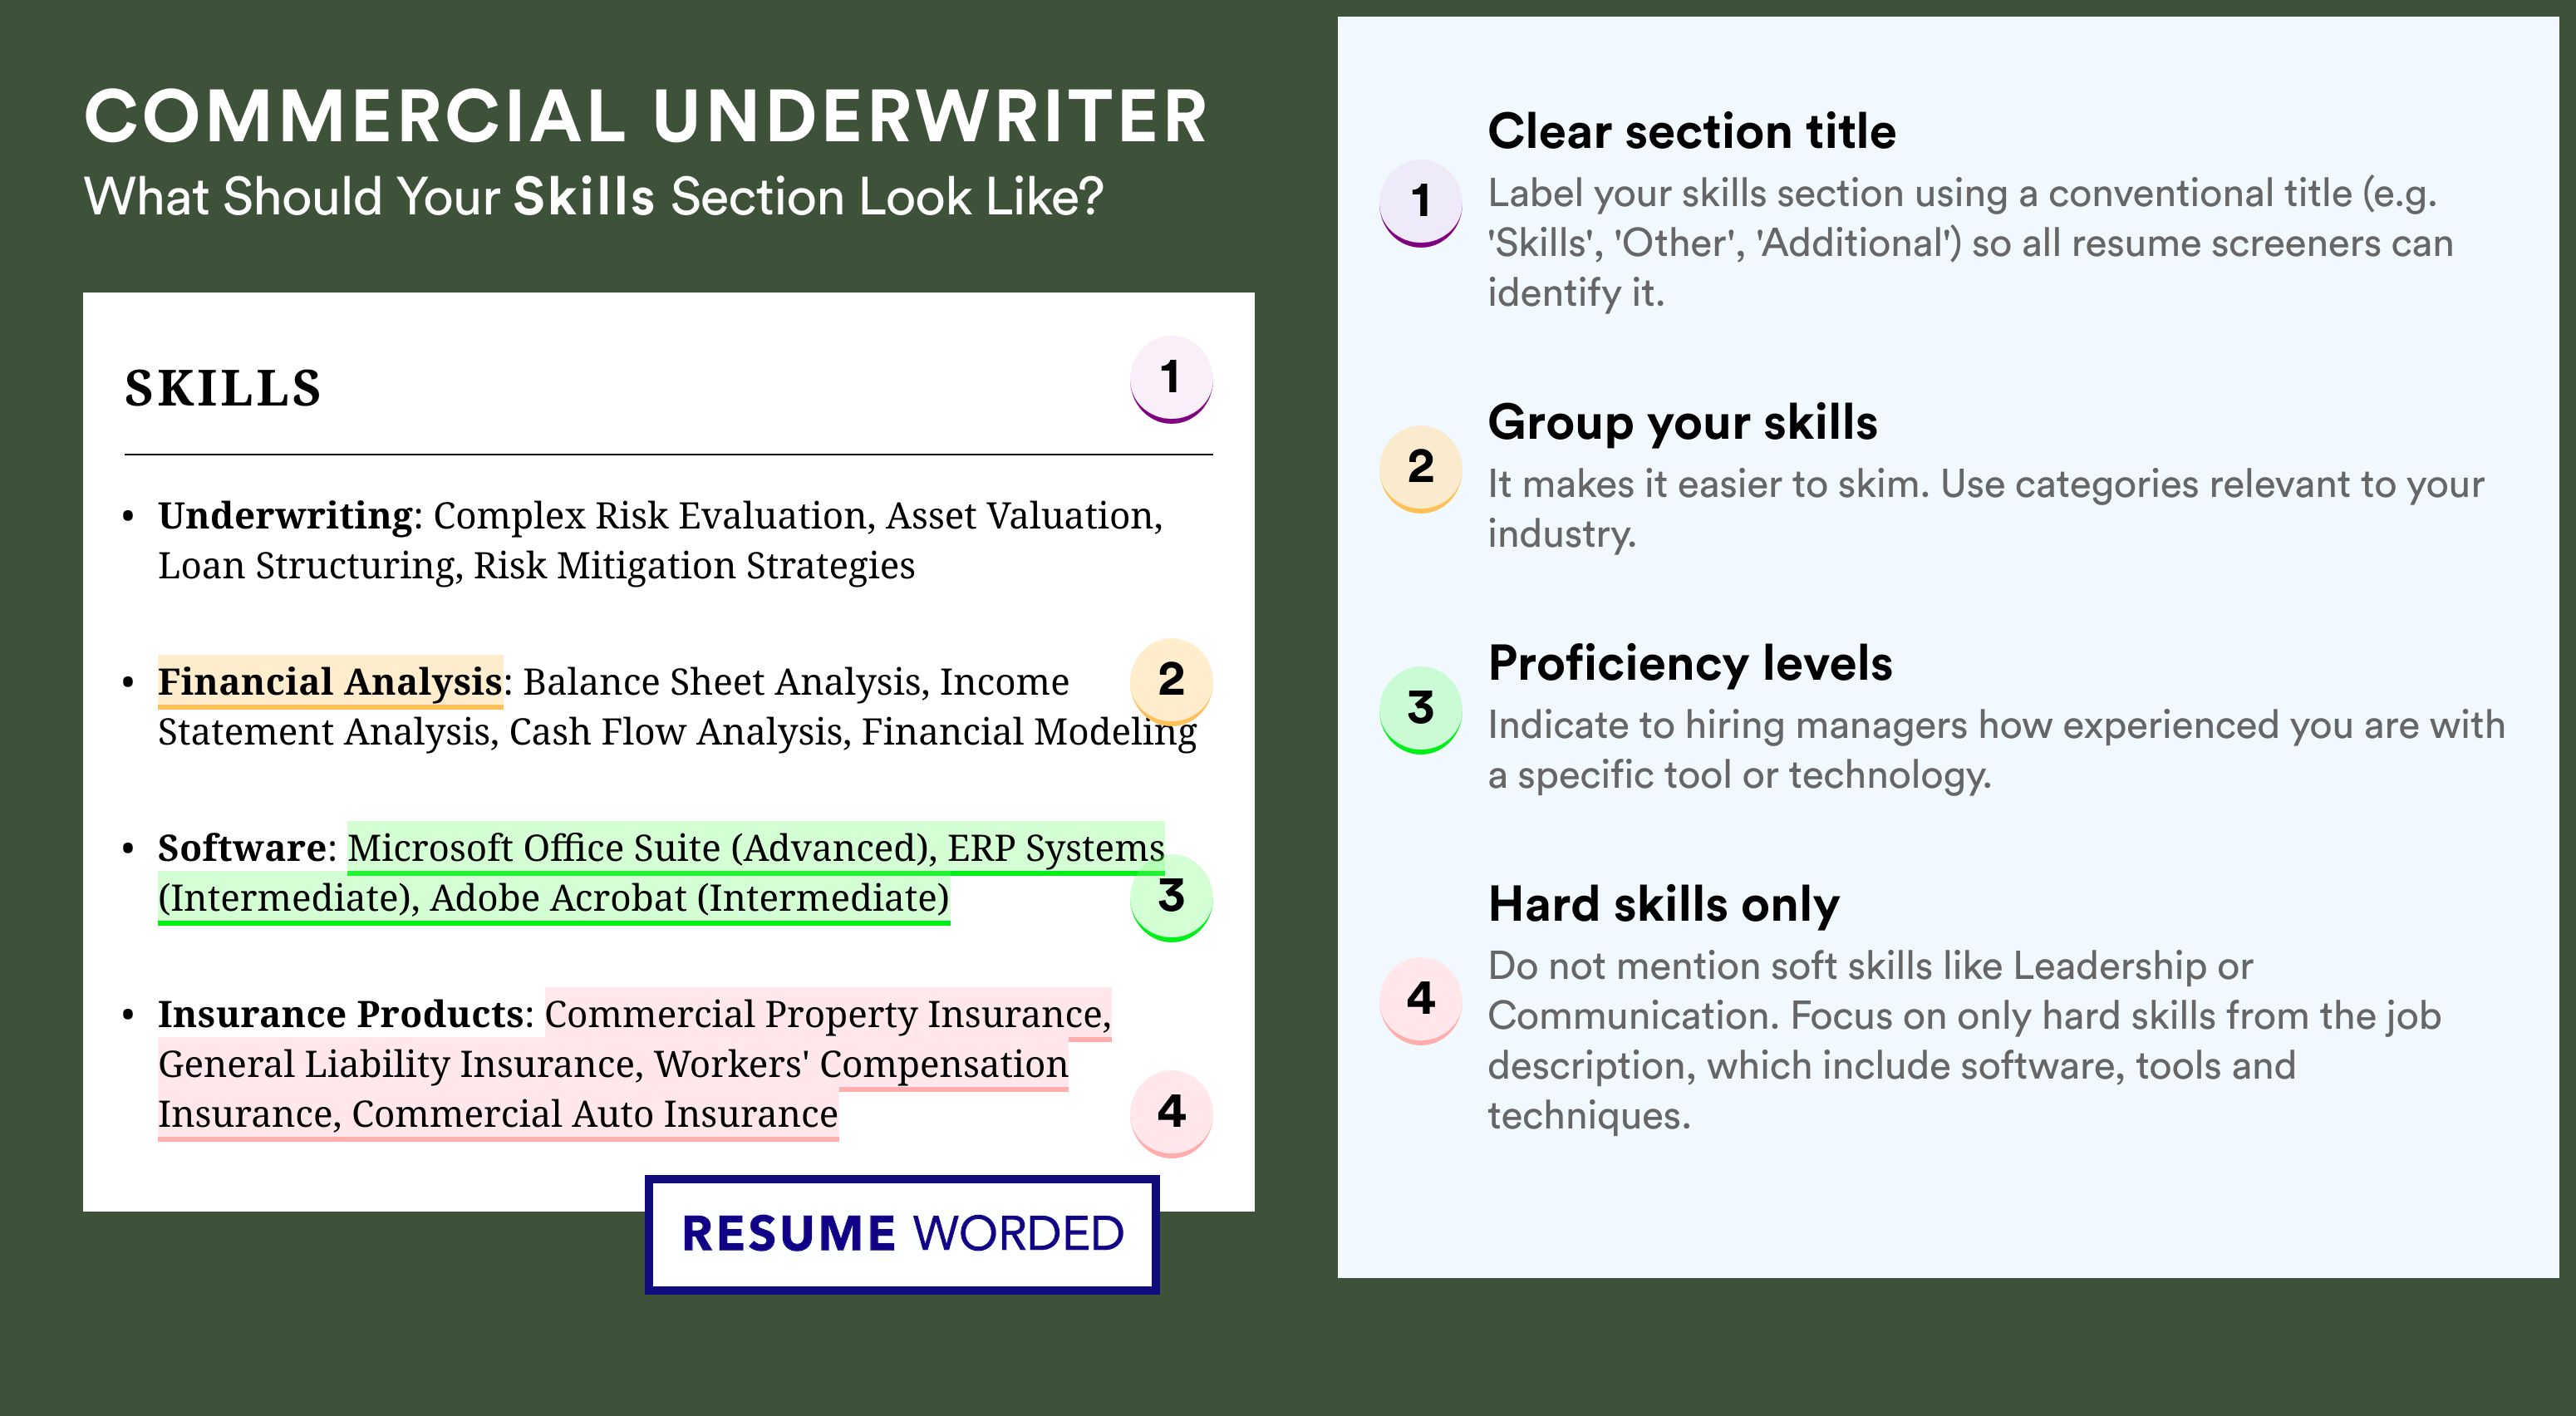 How To Write Your Skills Section - Commercial Underwriter Roles